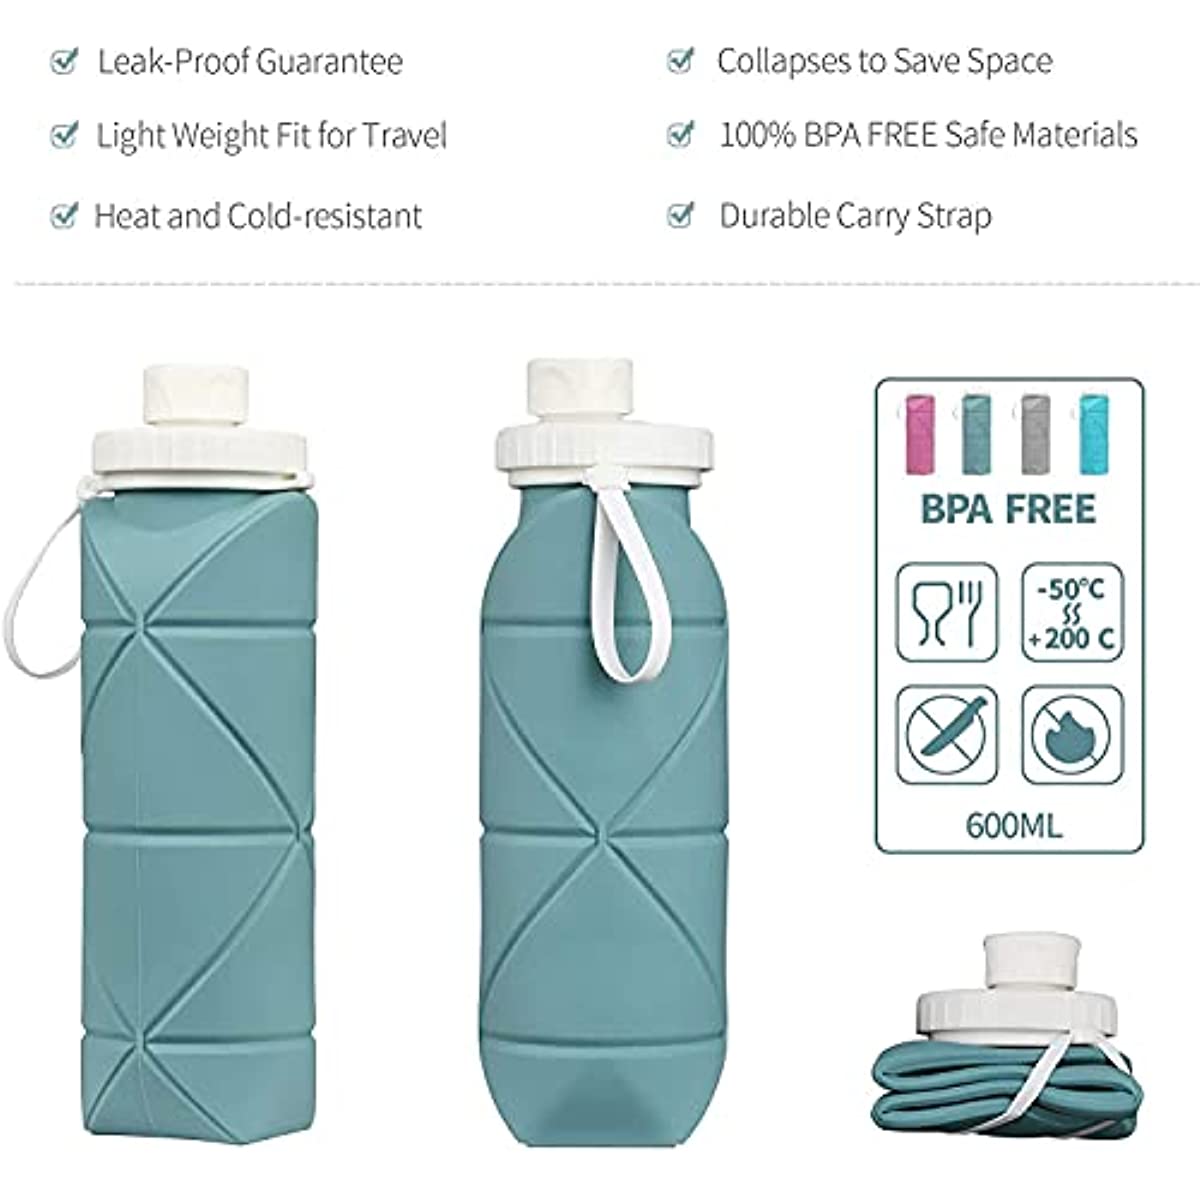 600ml Collapsible Water Bottles Cups Leakproof Valve Reusable Bpa Free  Silicone Foldable Travel Water Bottle Cup For Gym Camping Hiking Travel  Sports